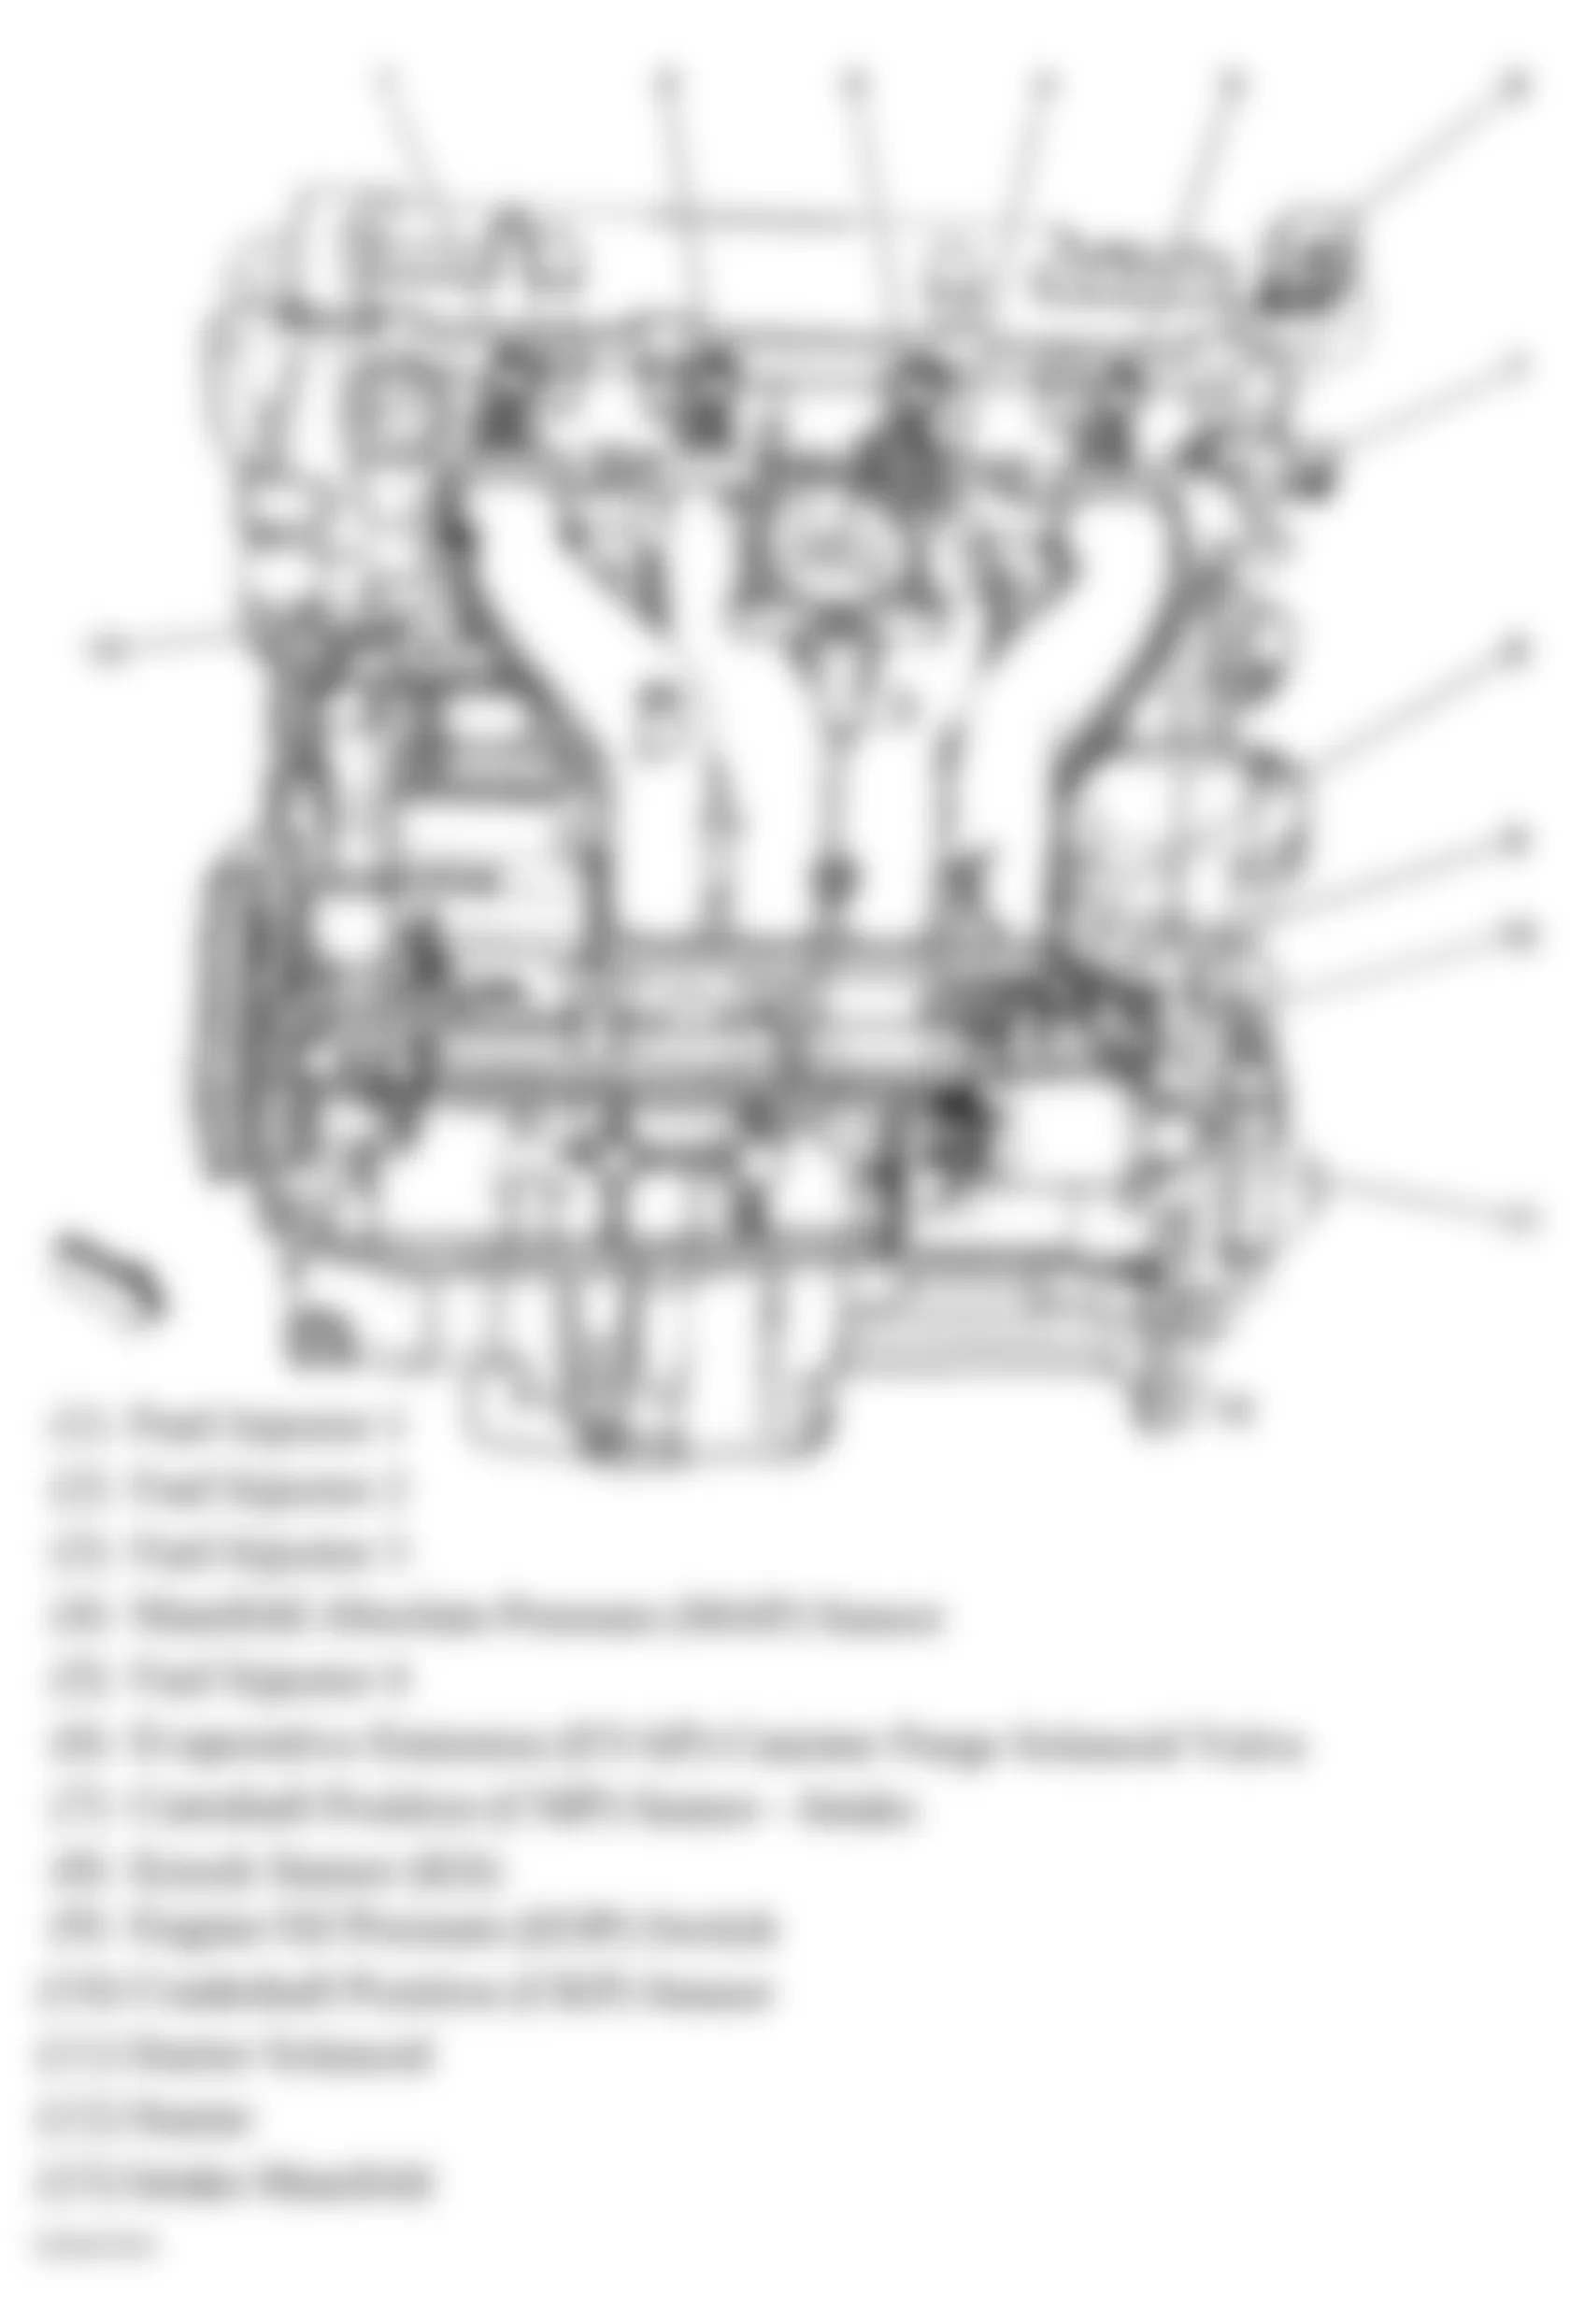 Chevrolet HHR LT 2009 - Component Locations -  Left Side Of Engine (2.4L)